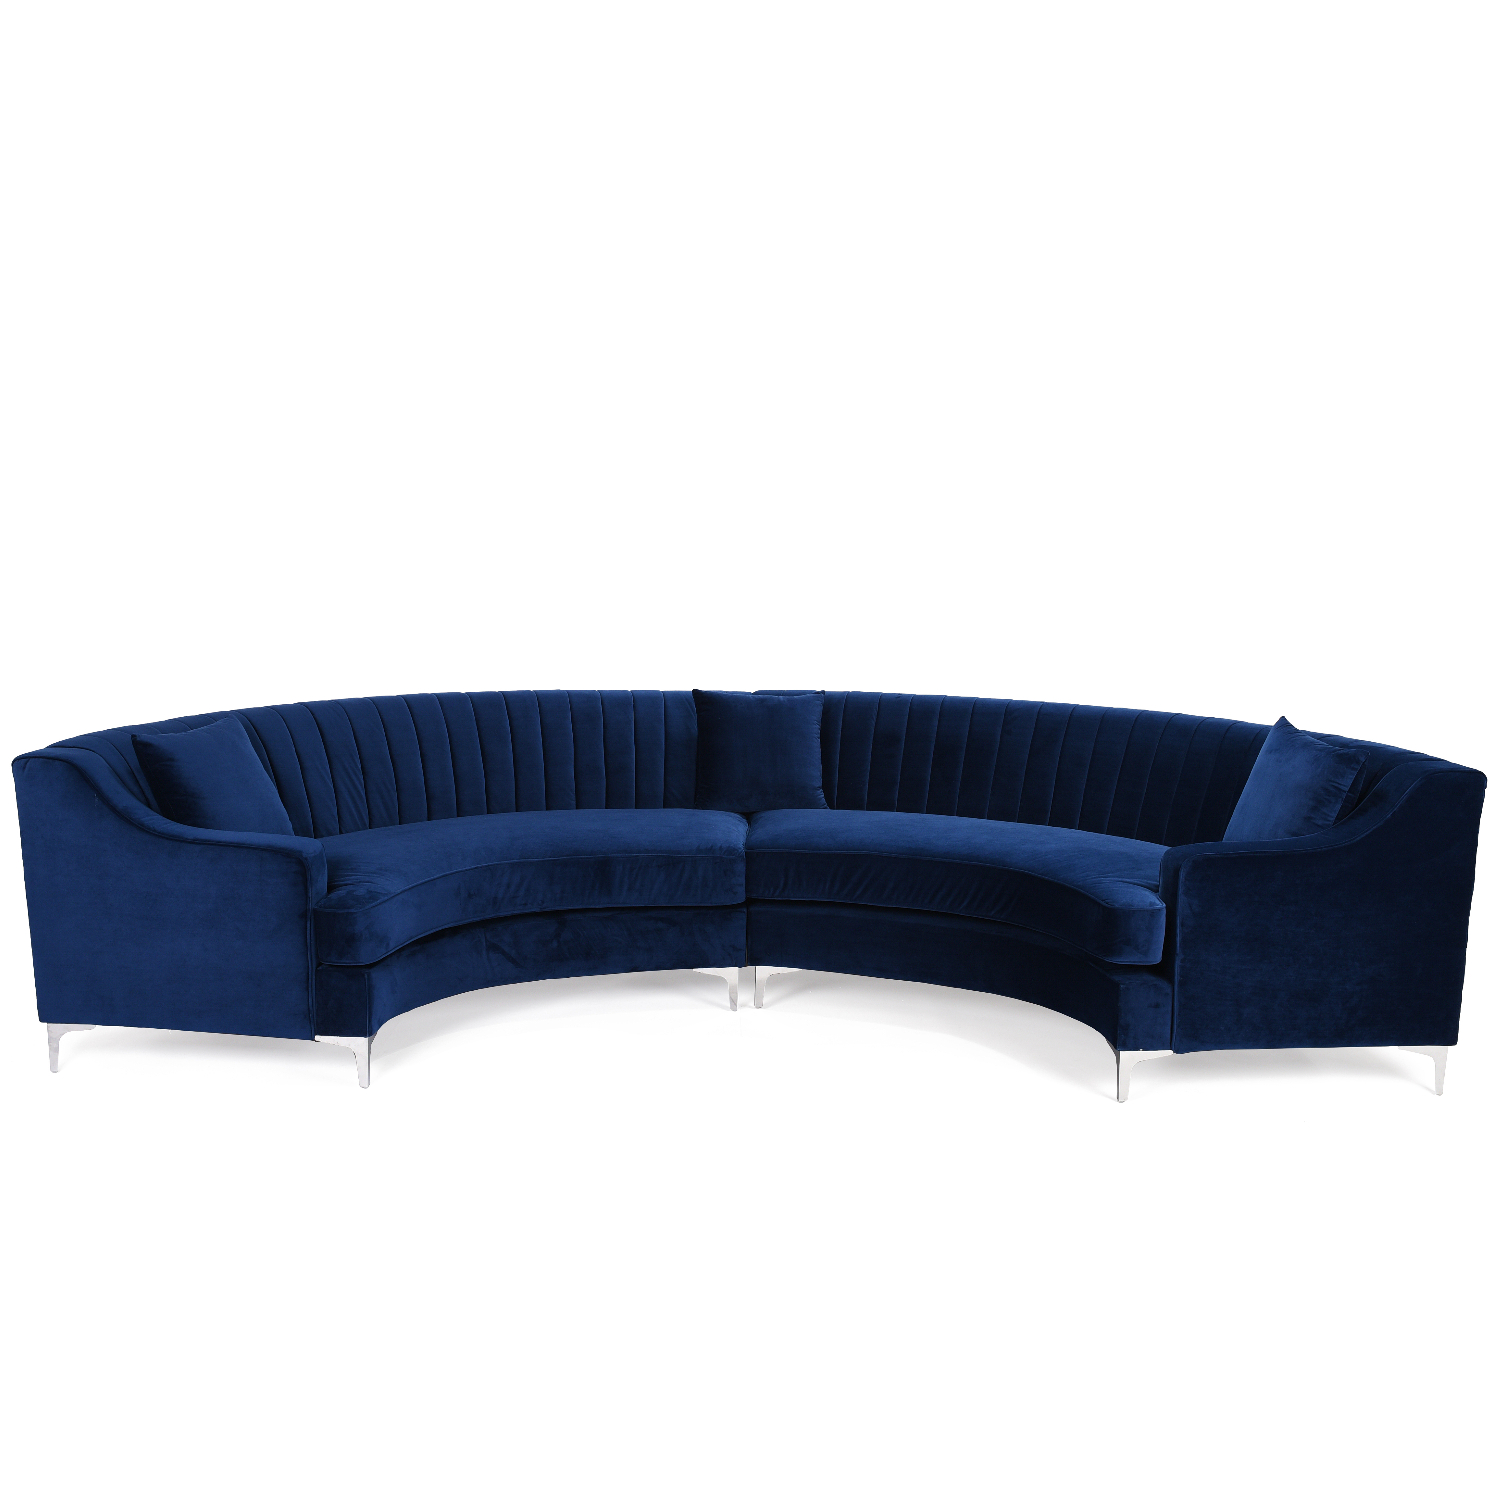 Carter Sofa | Event Effects Group